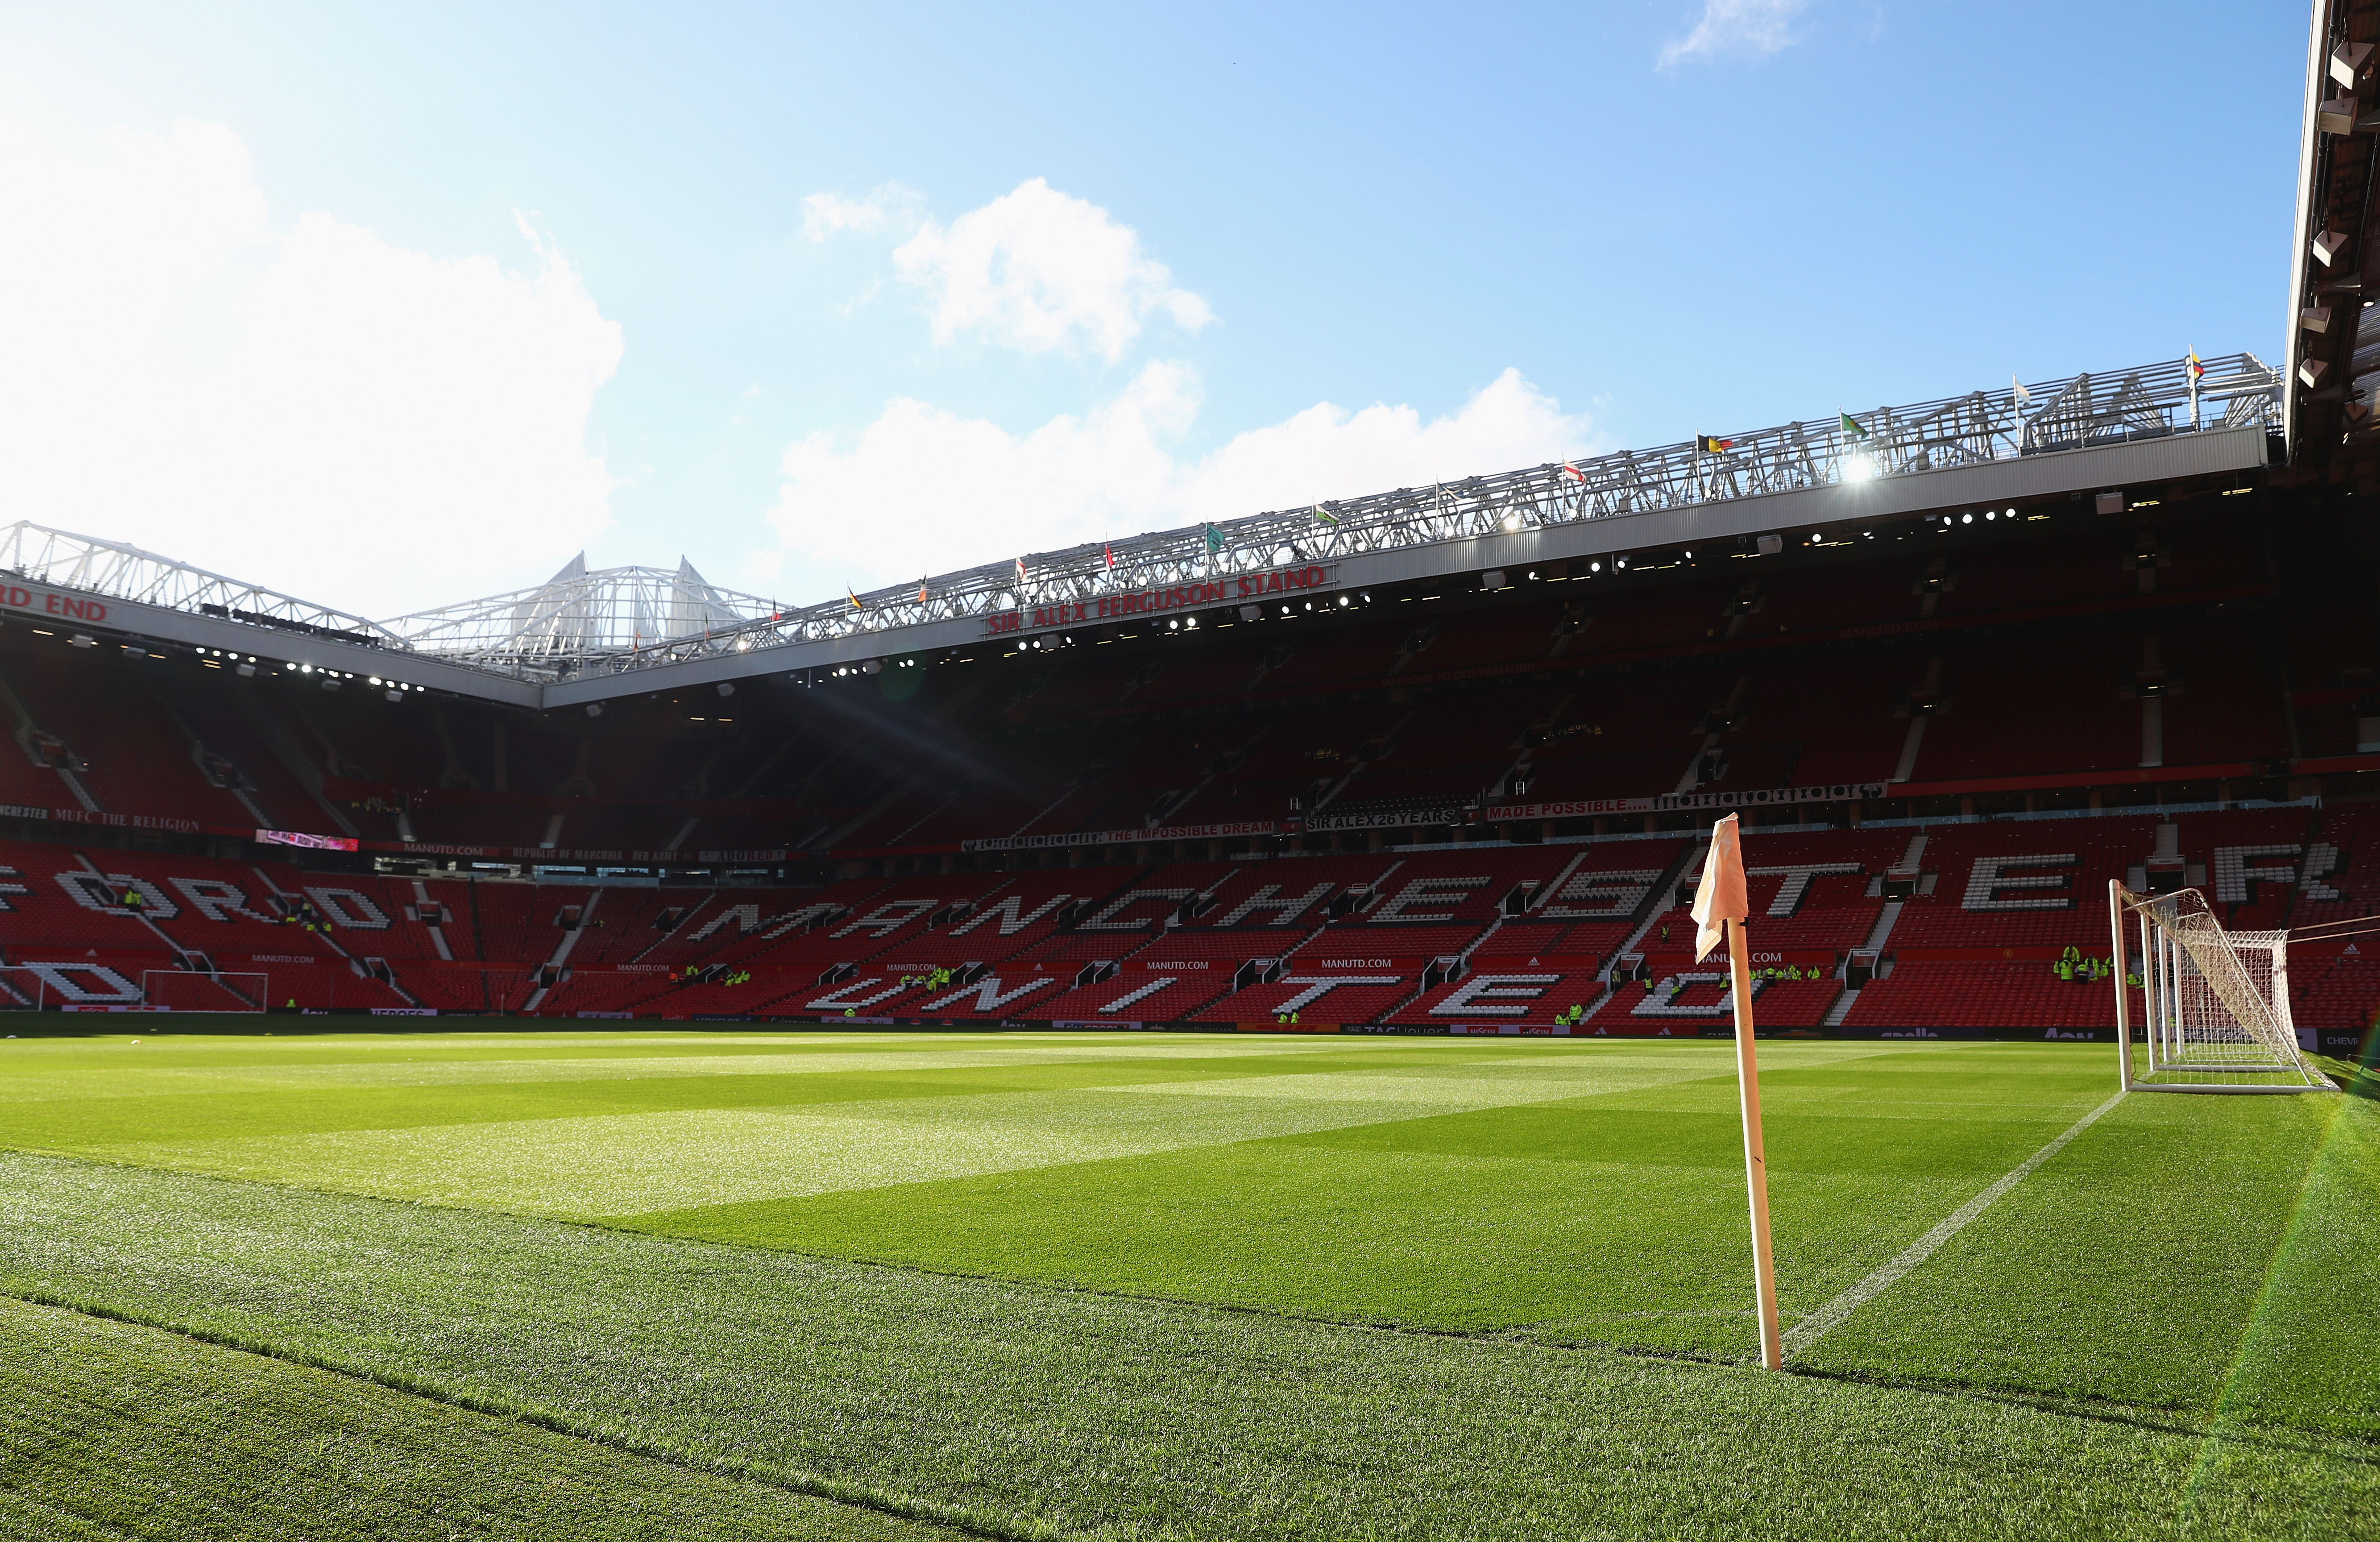 MANCHESTER, ENGLAND - AUGUST 19: A general view inside the ground prior to the Premier League match between Manchester United and Southampton at Old Trafford on August 19, 2016 in Manchester, England.  (Photo by Michael Steele/Getty Images)